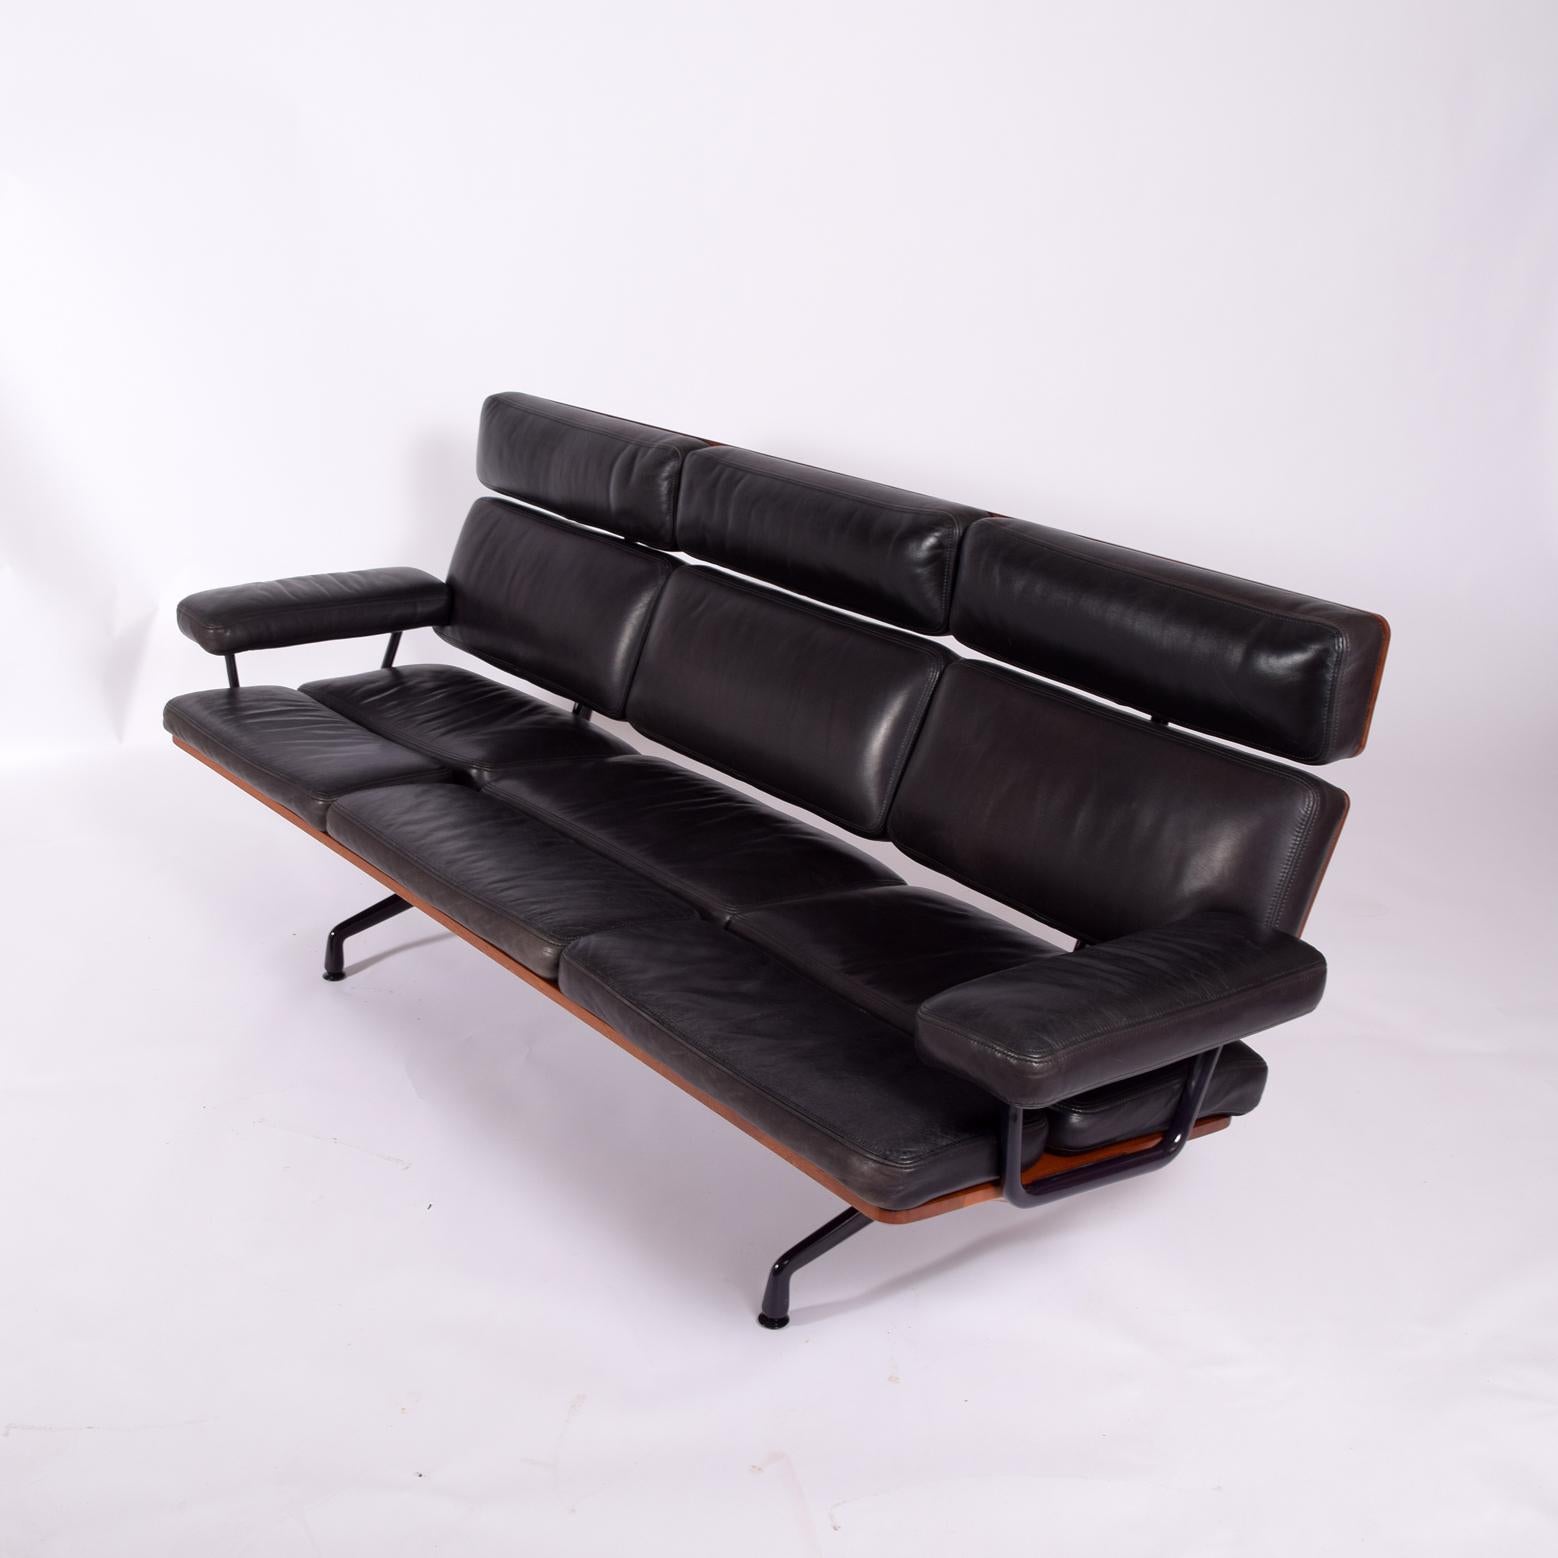 Her is last design by Charles & Ray Eames eggplant color aluminium frame solid teak wood and original black leather upholstery the sofa was purchased in 1987 last picture Ray Eames and the owner of the sofa 1986.